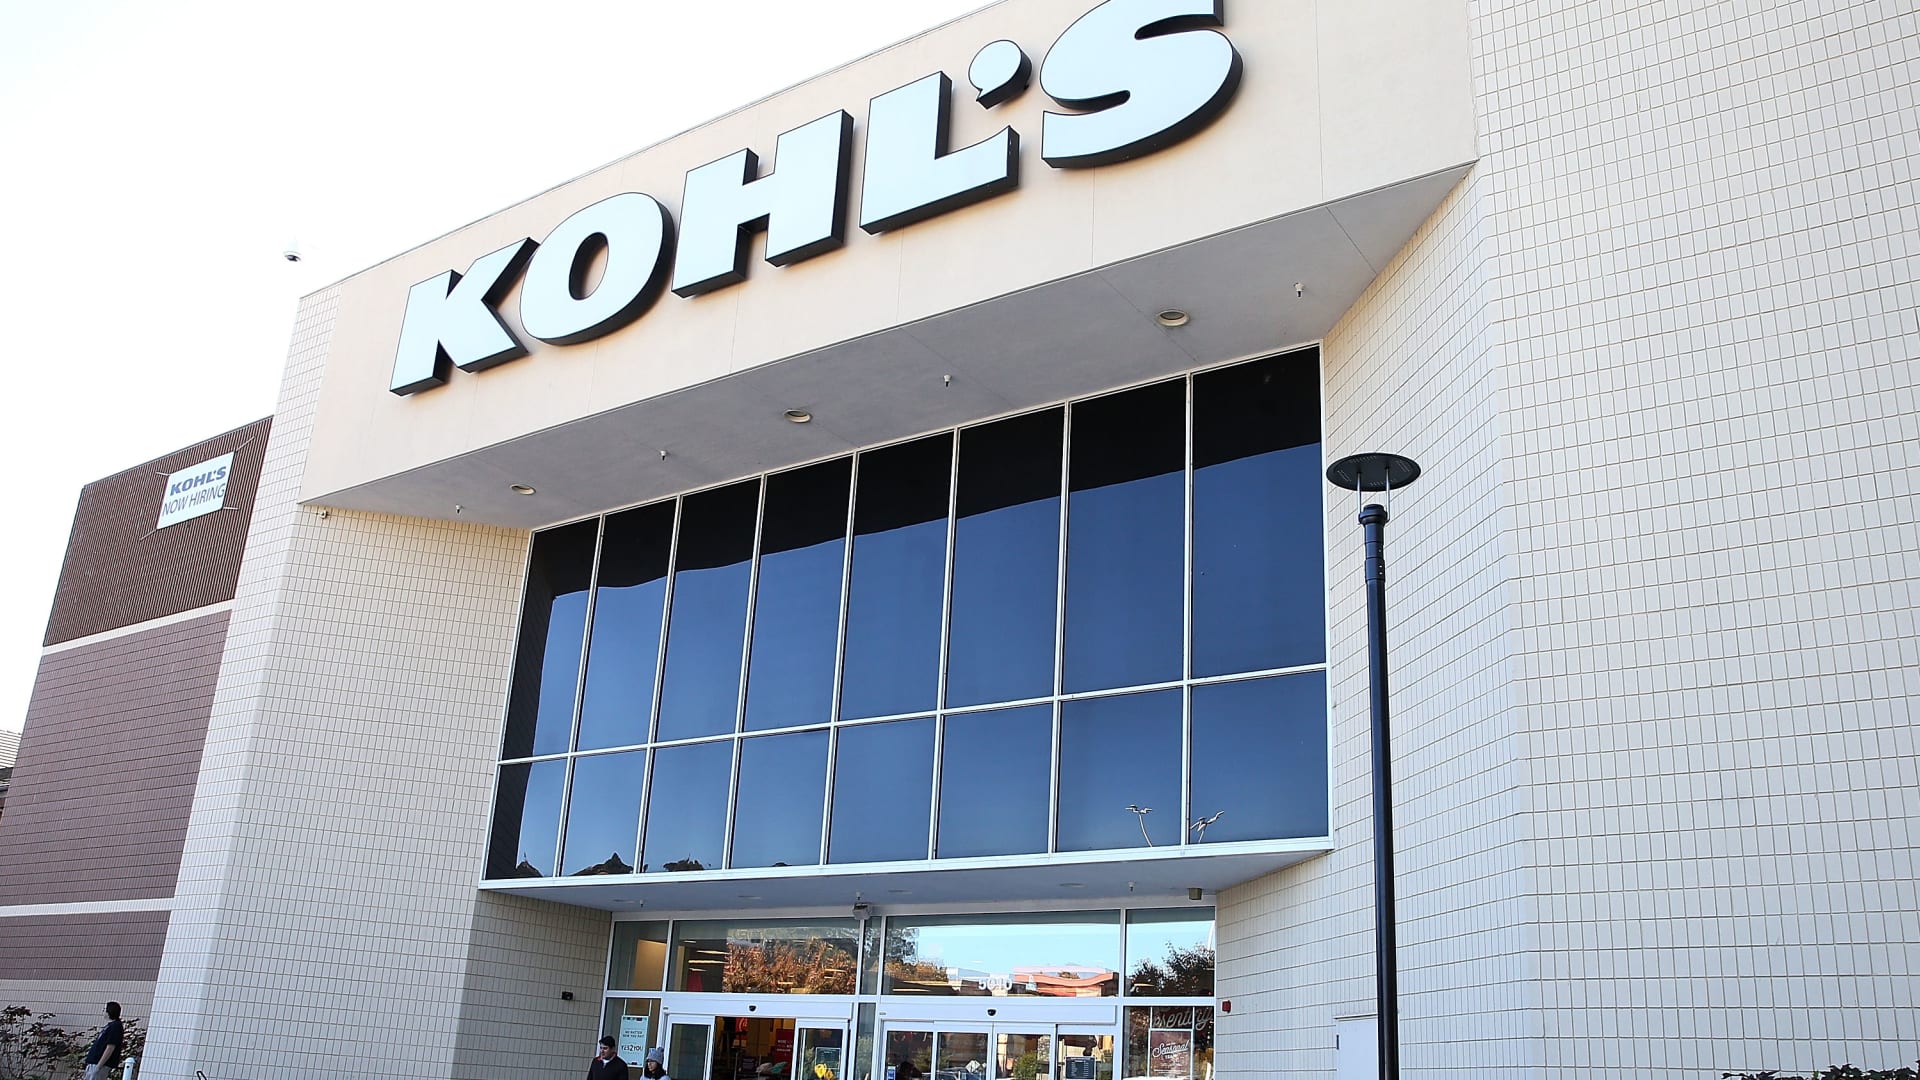 Kohl’s says final sale bids expected in coming weeks; retailer slashes full-year outlook after earnings miss